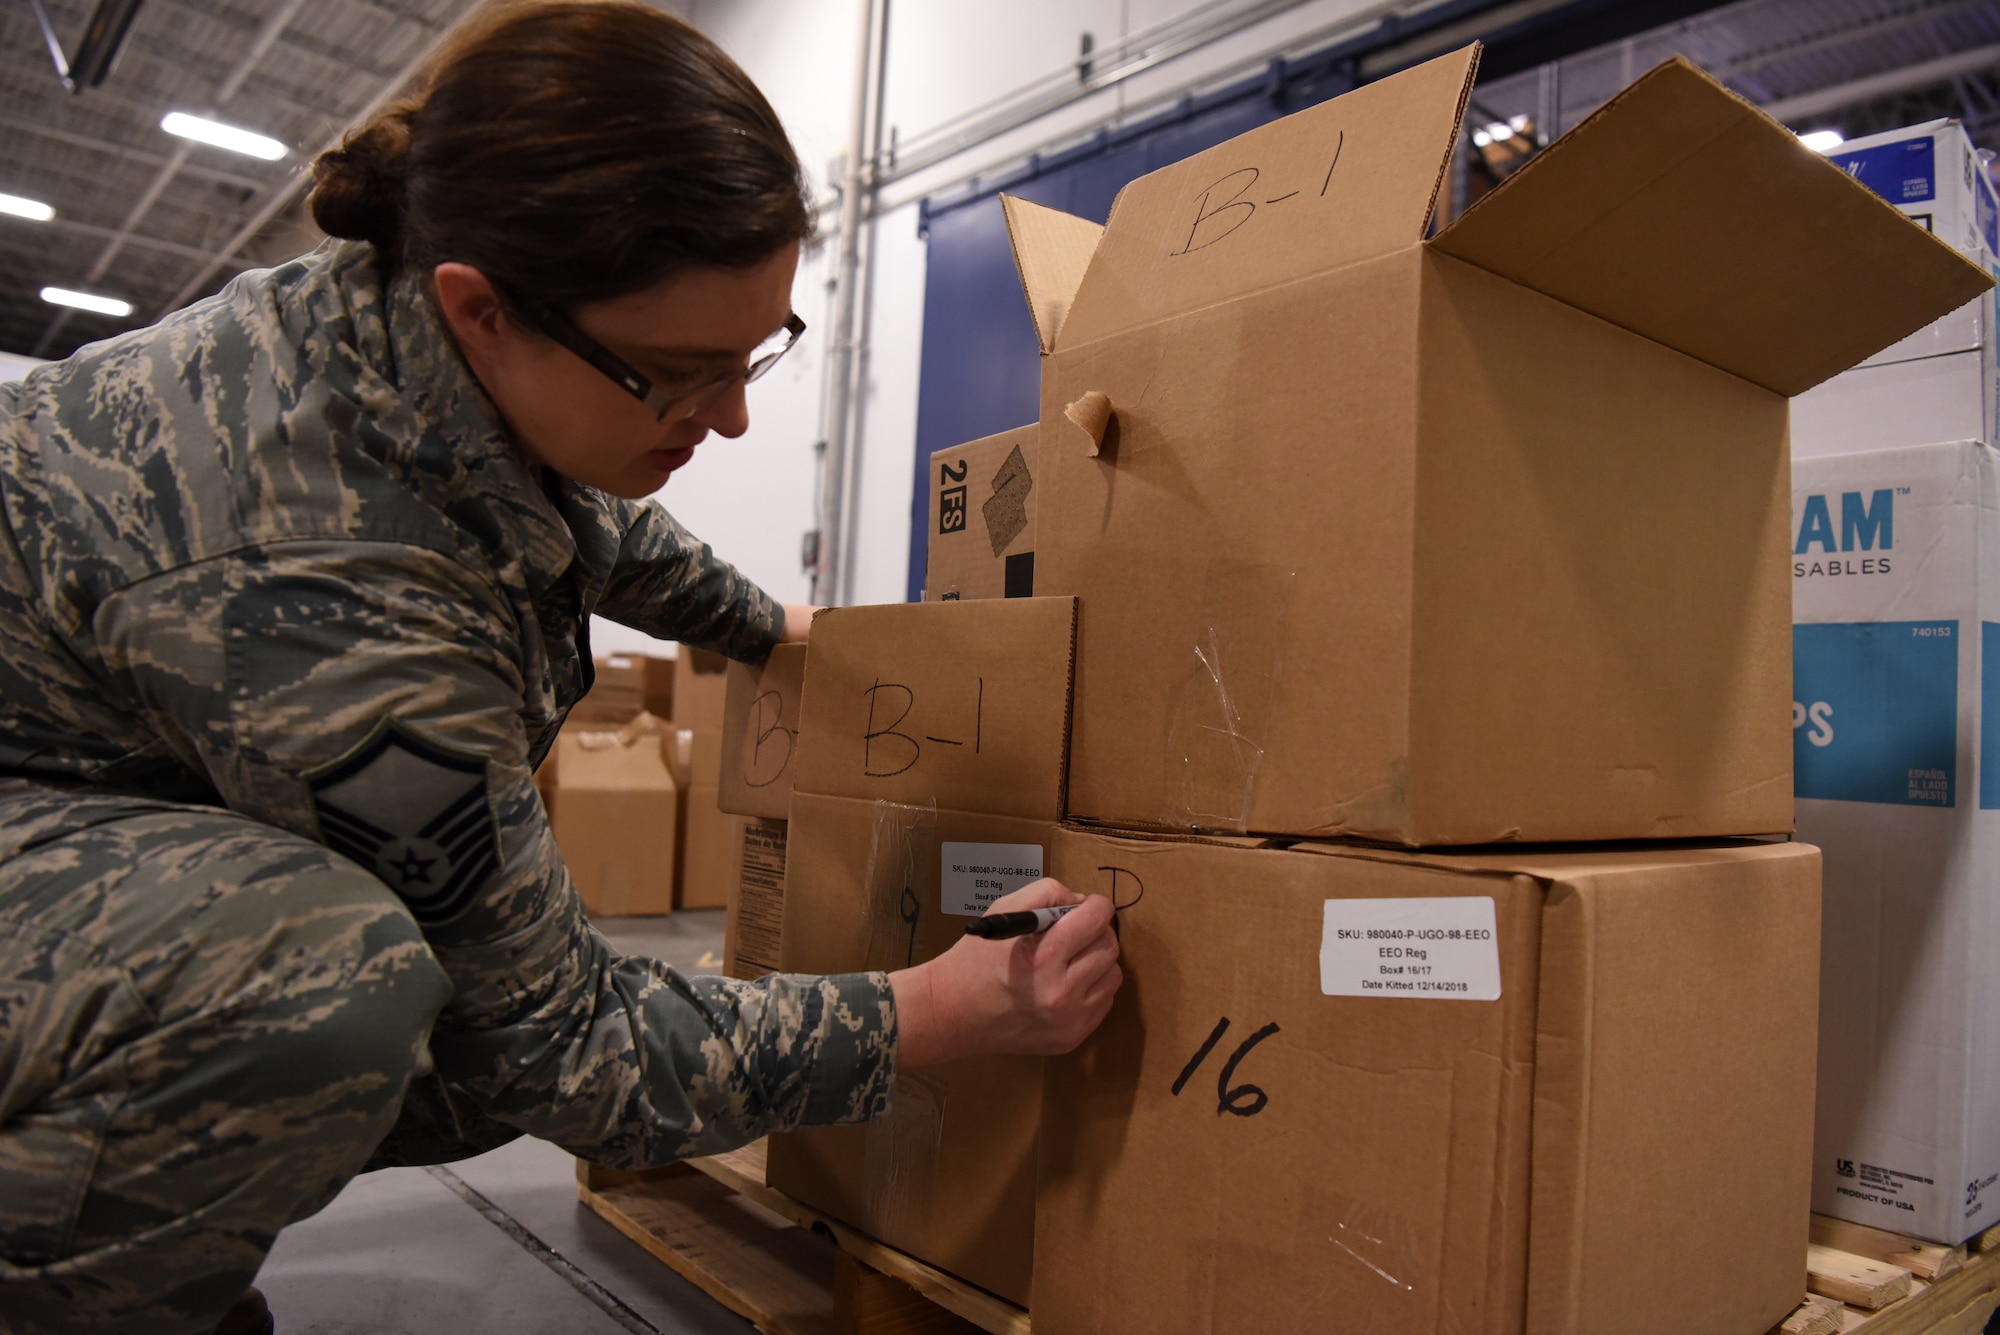 Master Sgt. Tina Bakker, 90th Force Support Squadron Missile Alert Facility Feeding Operations flight chief, writes site locations on packages Jan. 28, 2019, at F. E. Warren Air Force Base, Wyo. The care packages are part of the USO2GO initiative, where snacks are transported to missile alert facility sites to boost morale for Airmen in the field. (U.S. Air Force photo by Tech. Sgt. Ashley Manz)